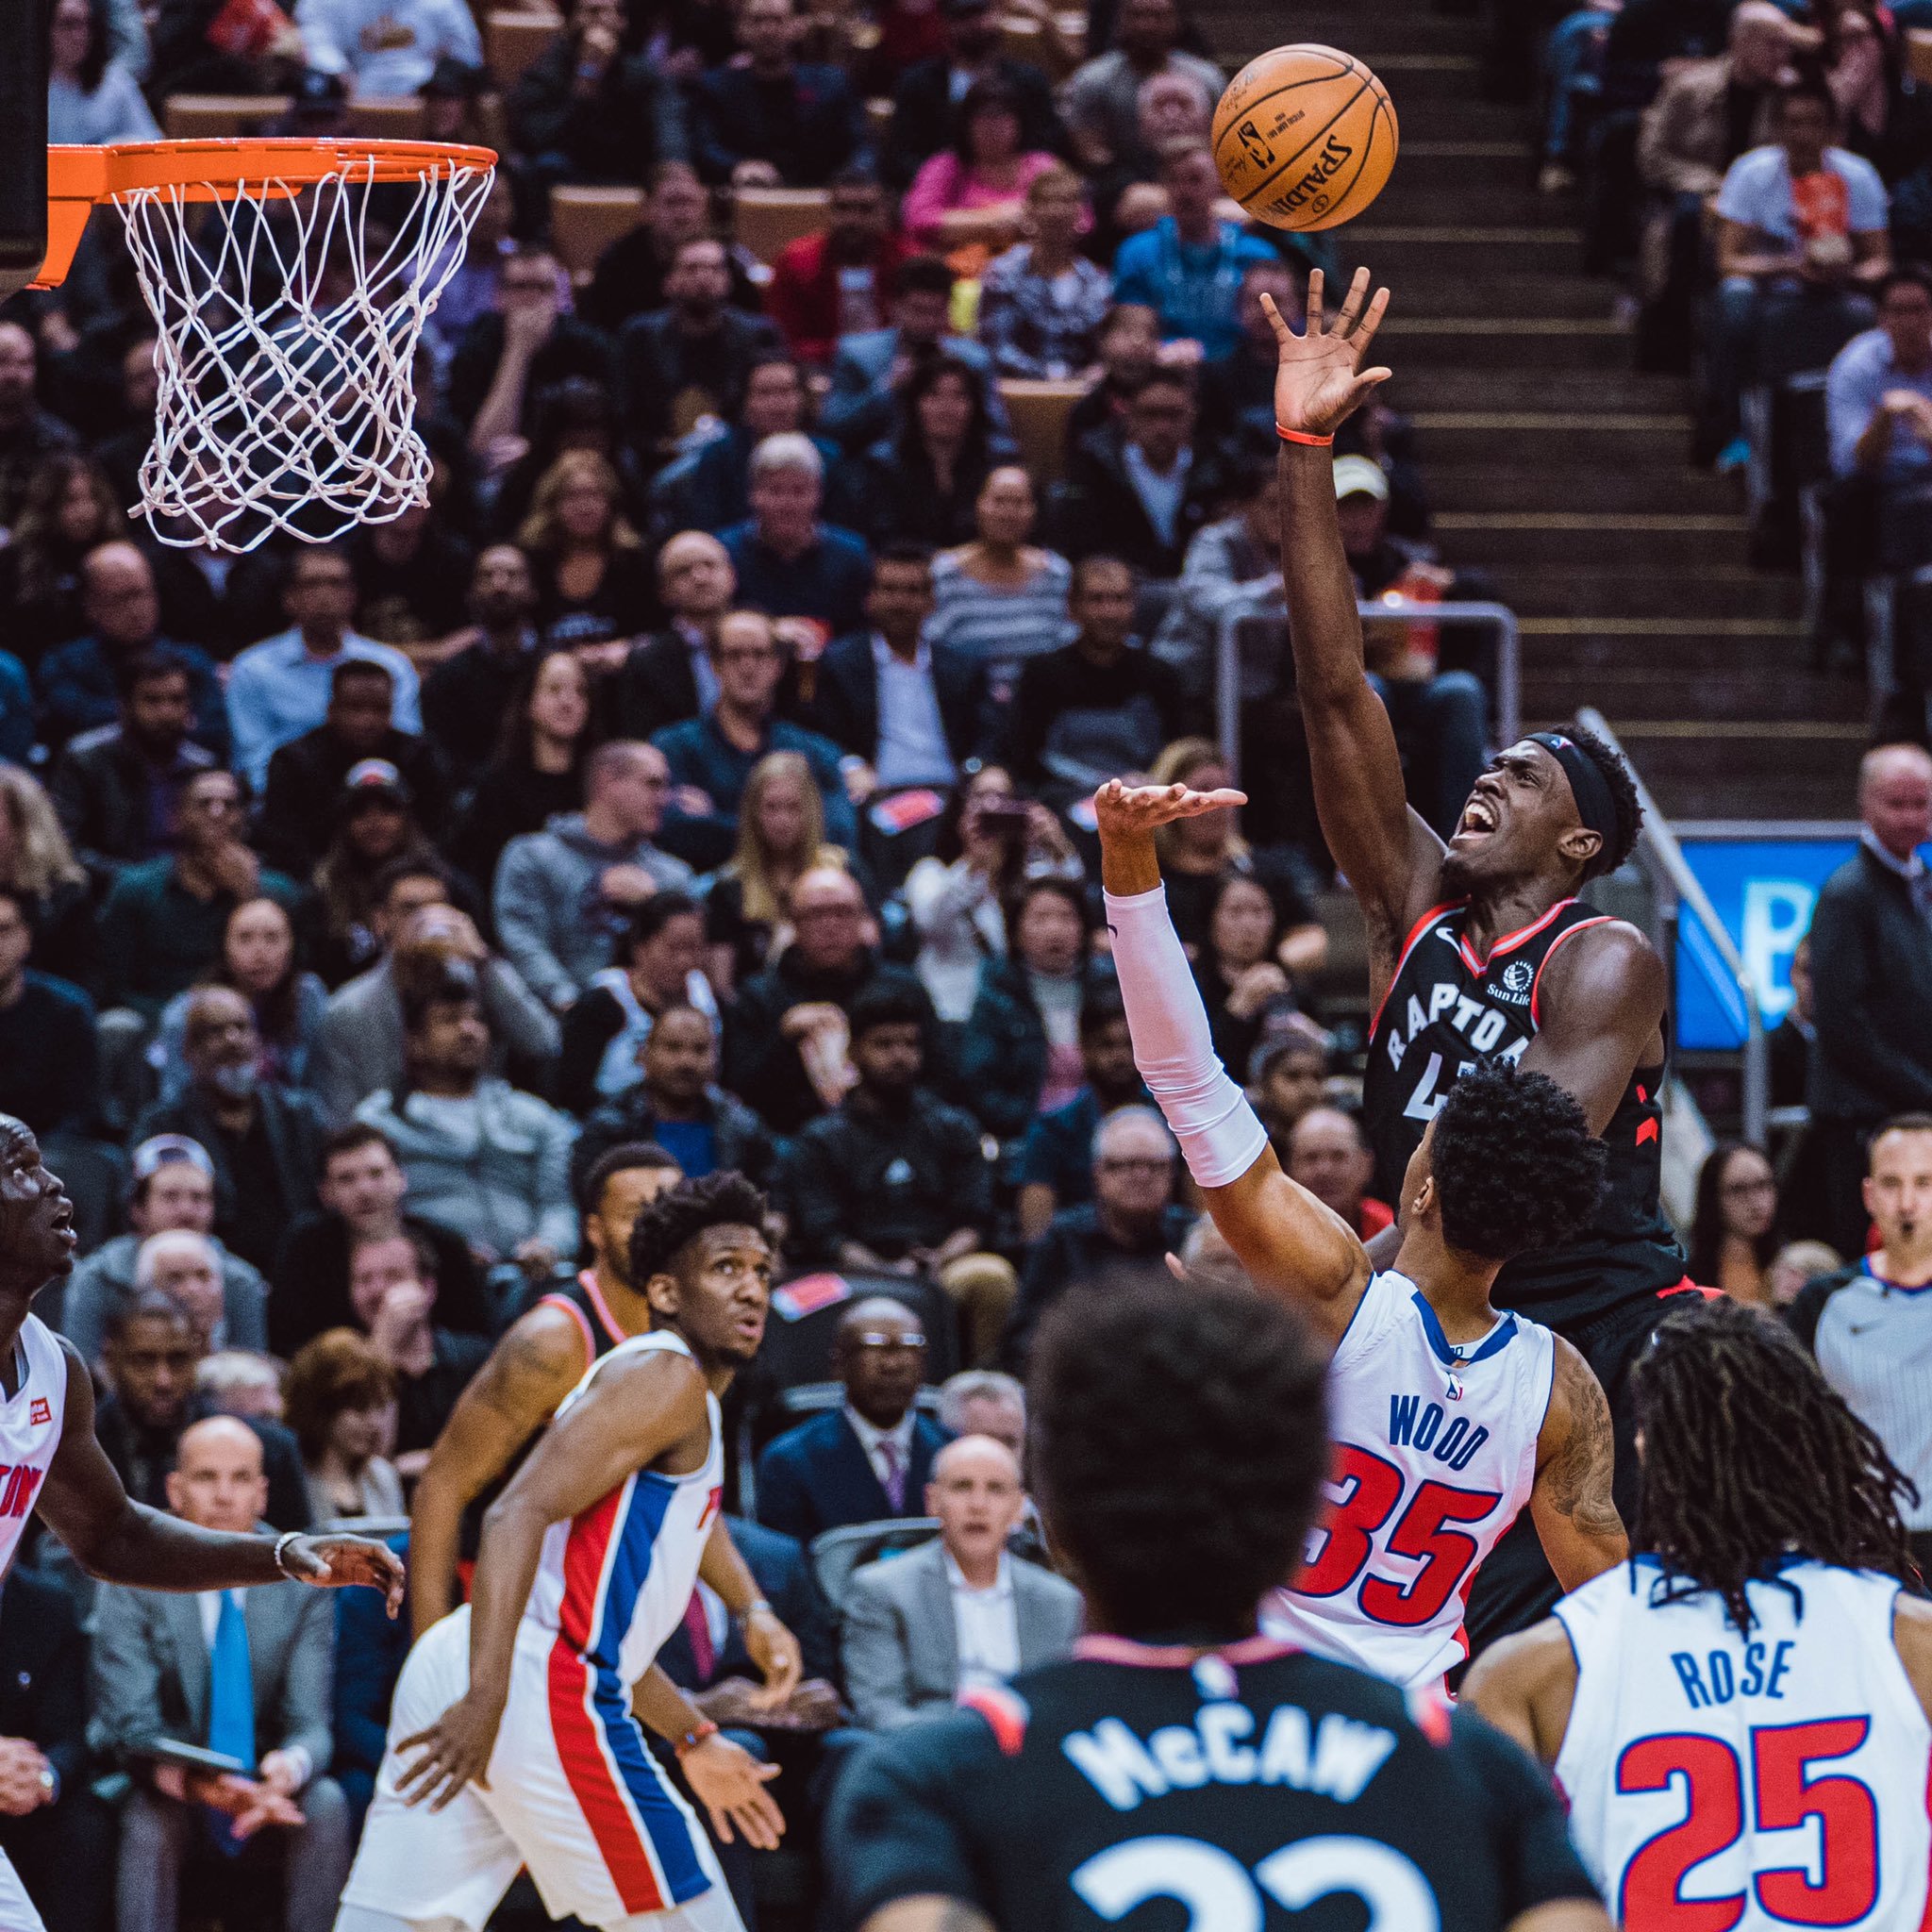 Flipboard: Pascal Siakam's Skills At Last Night's Game Has Some Fans Thinking He's The ...